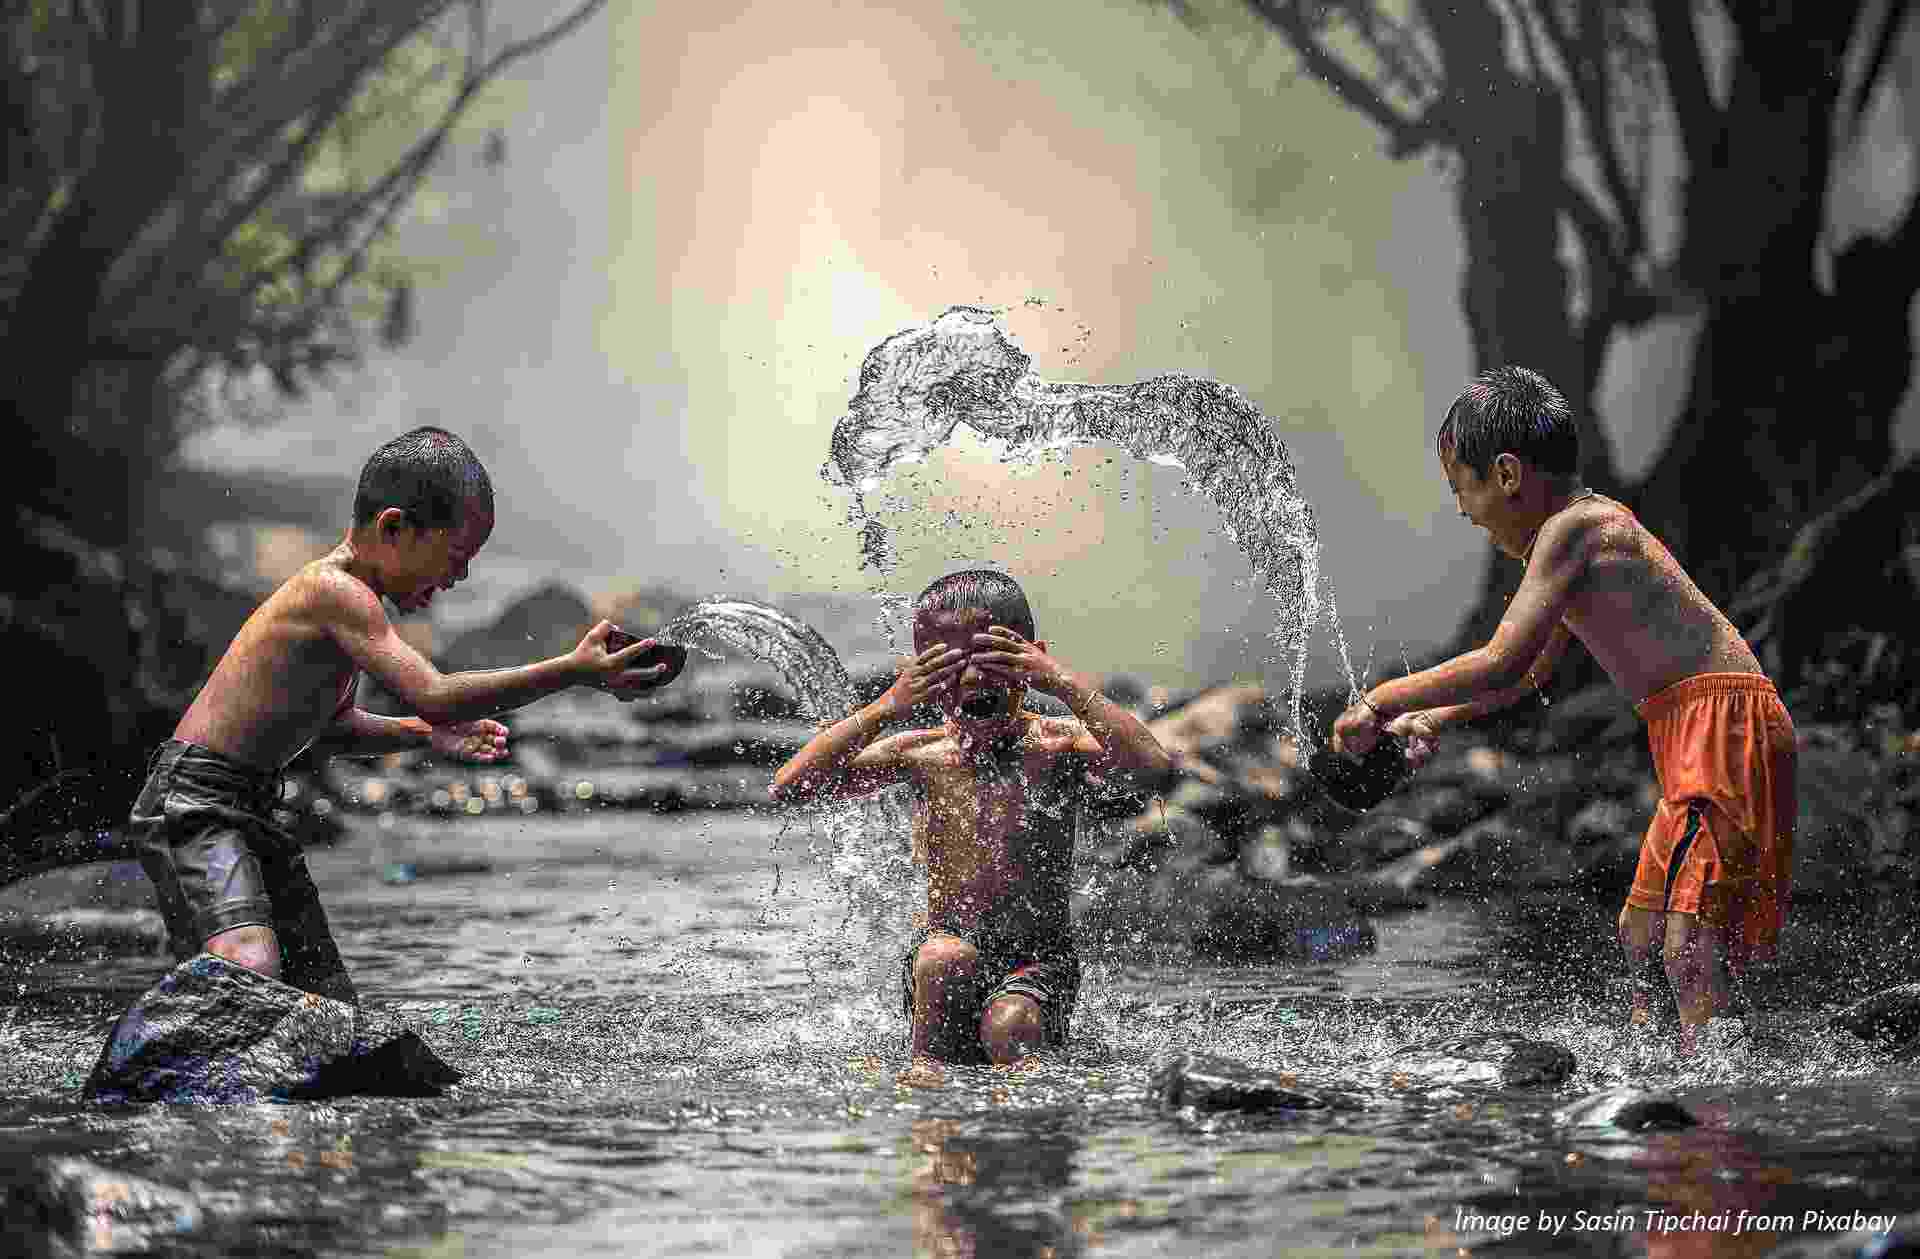 Three young boys joyfully throw water over each other playing in a river